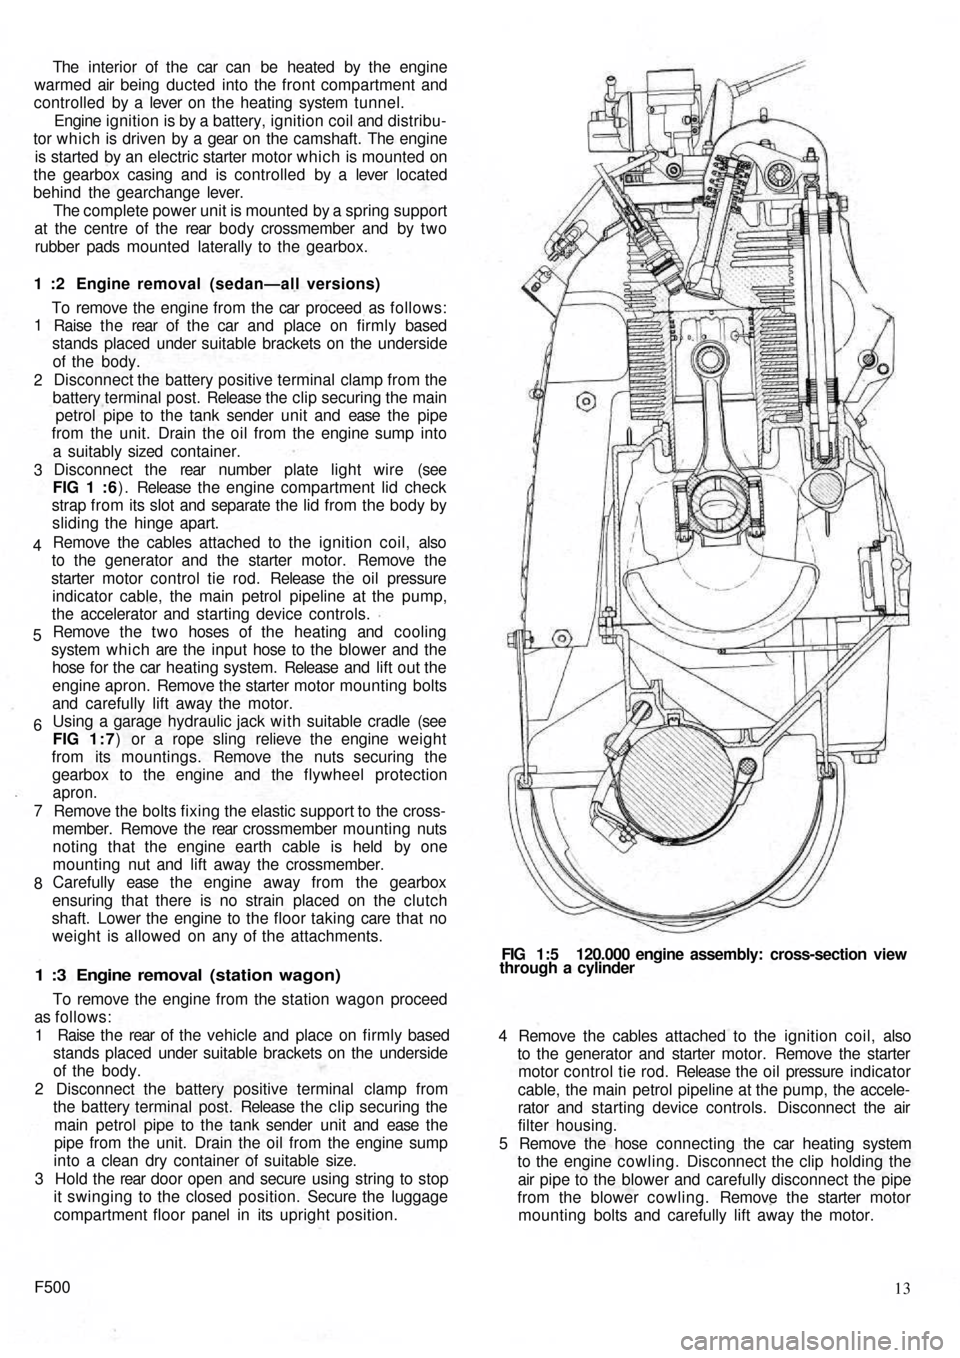 FIAT 500 1972 1.G Workshop Manual The  interior of the  car can  be heated by the engine
warmed air being ducted into the front compartment and
controlled  by a  lever on the heating system tunnel.
Engine ignition is by a battery, ign